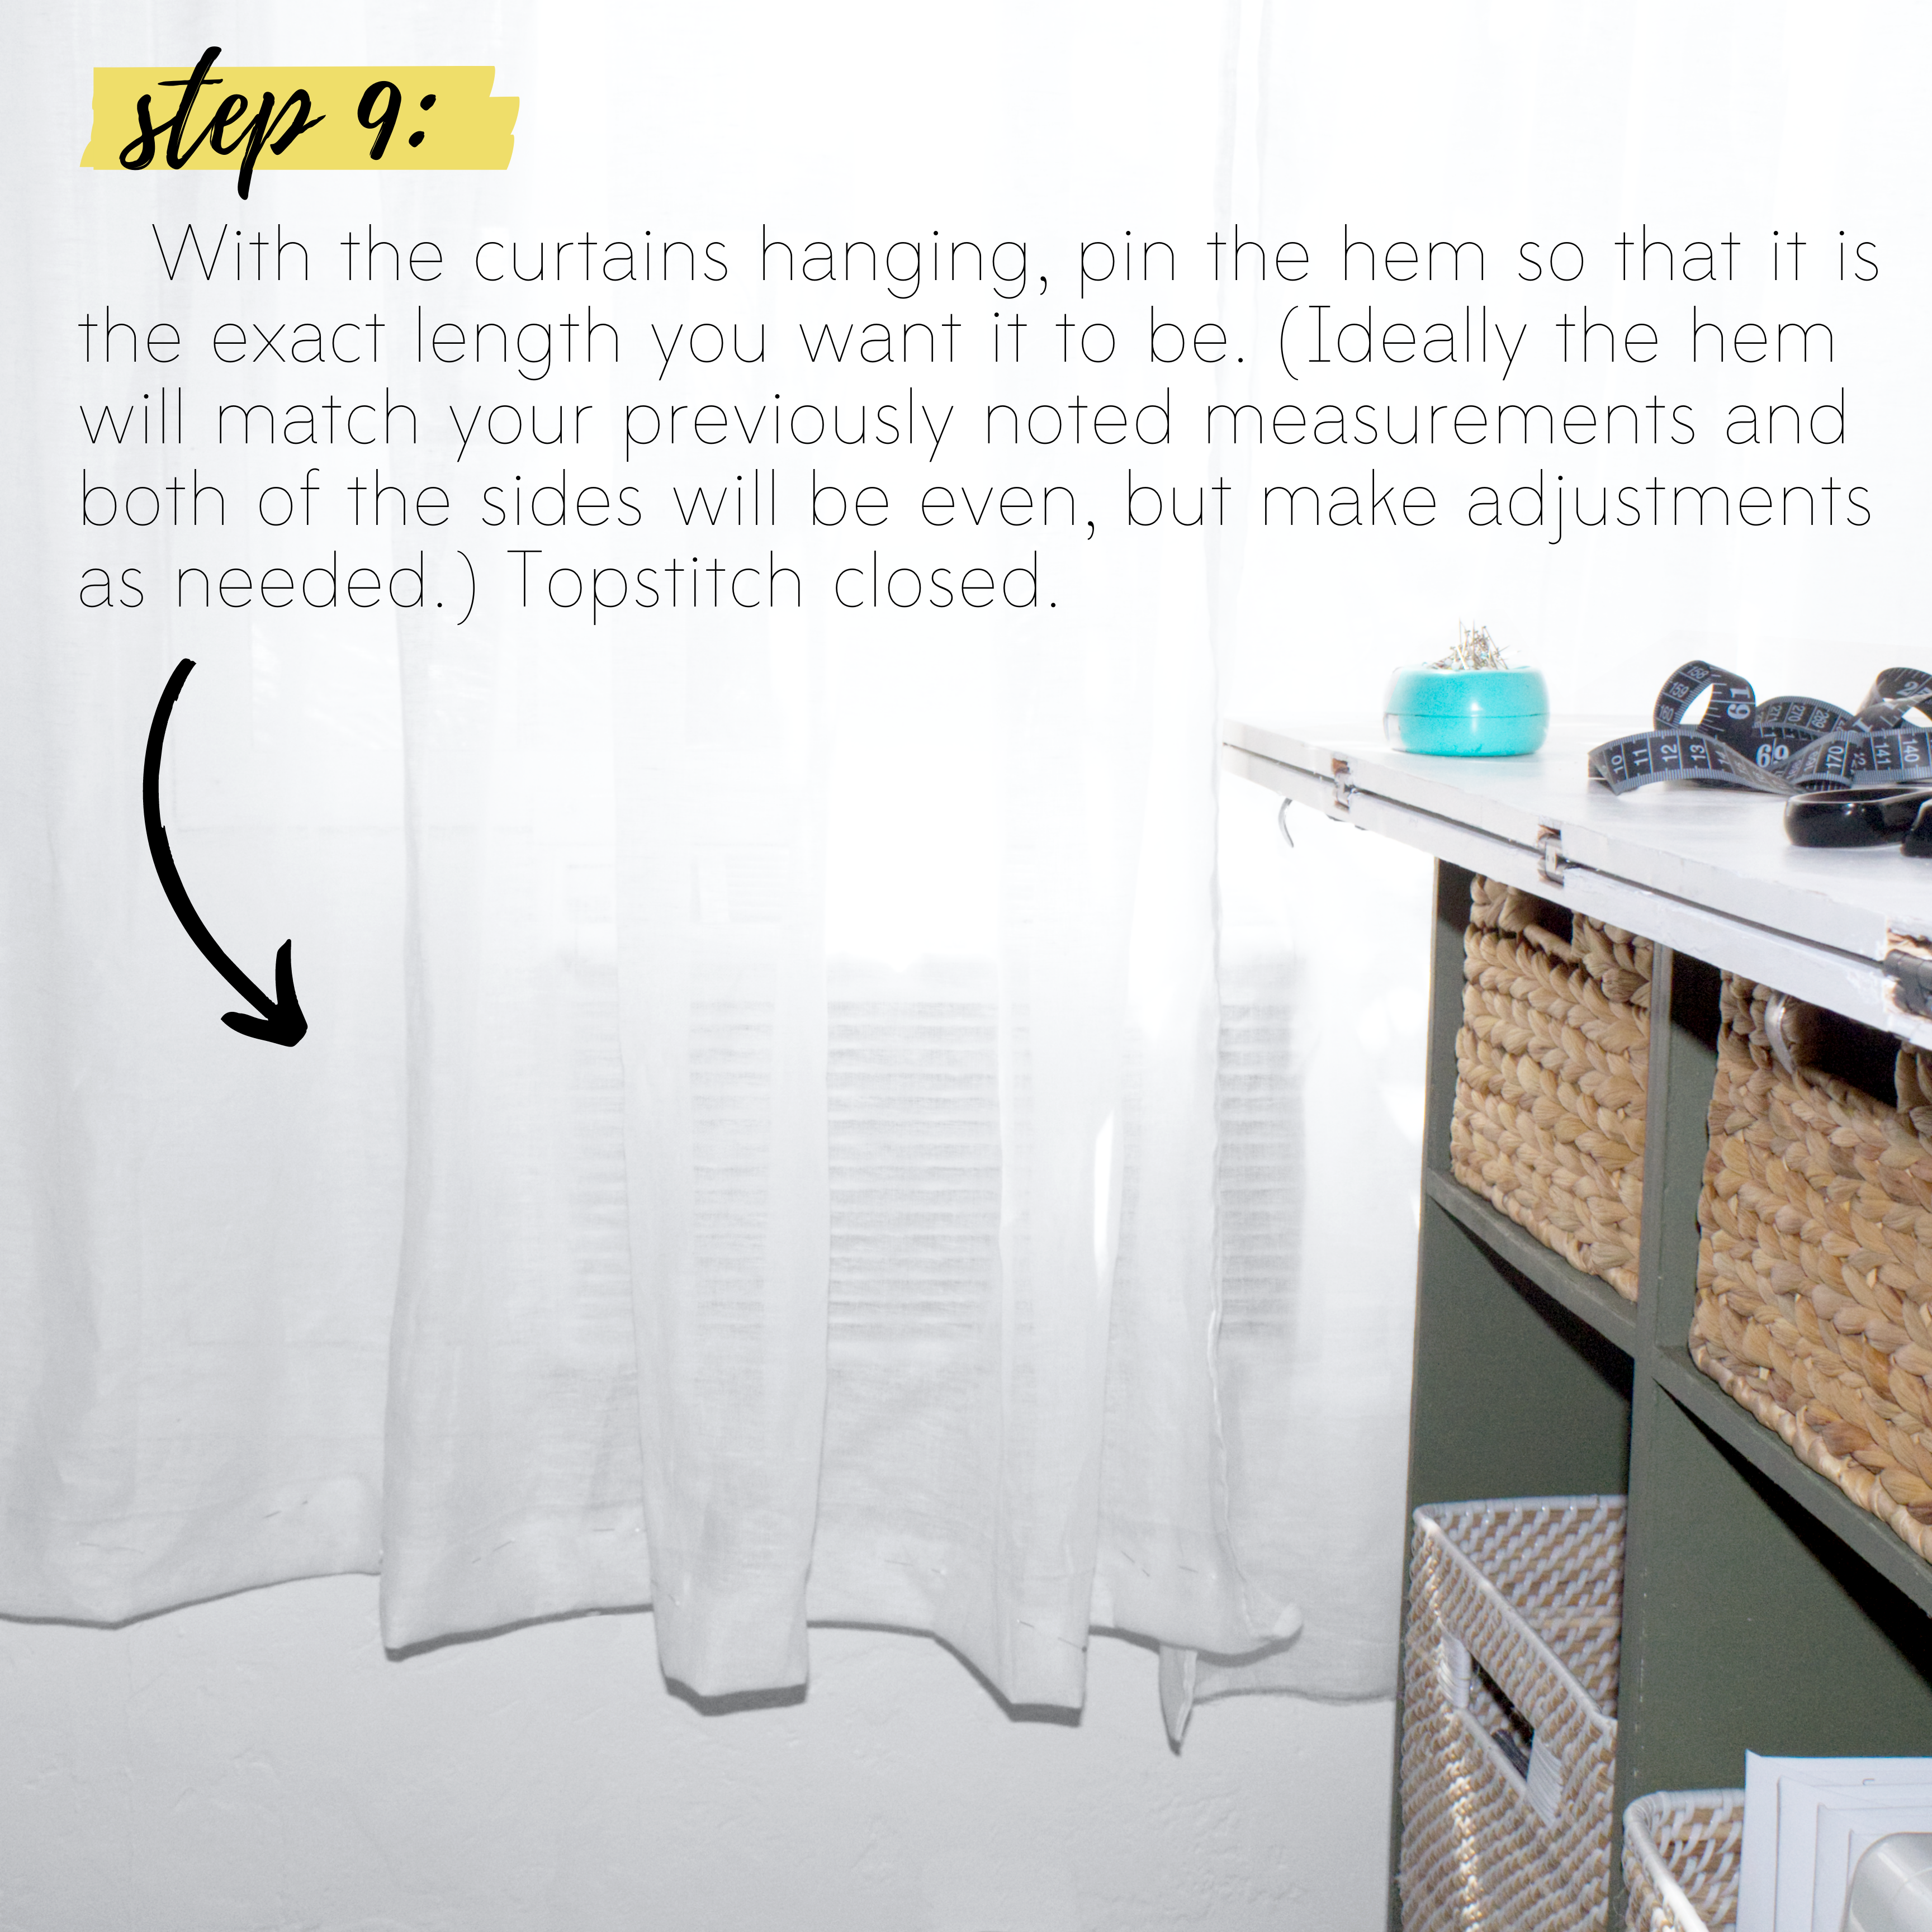 How to sew easy curtains DIY sewing tutorial: Step 9